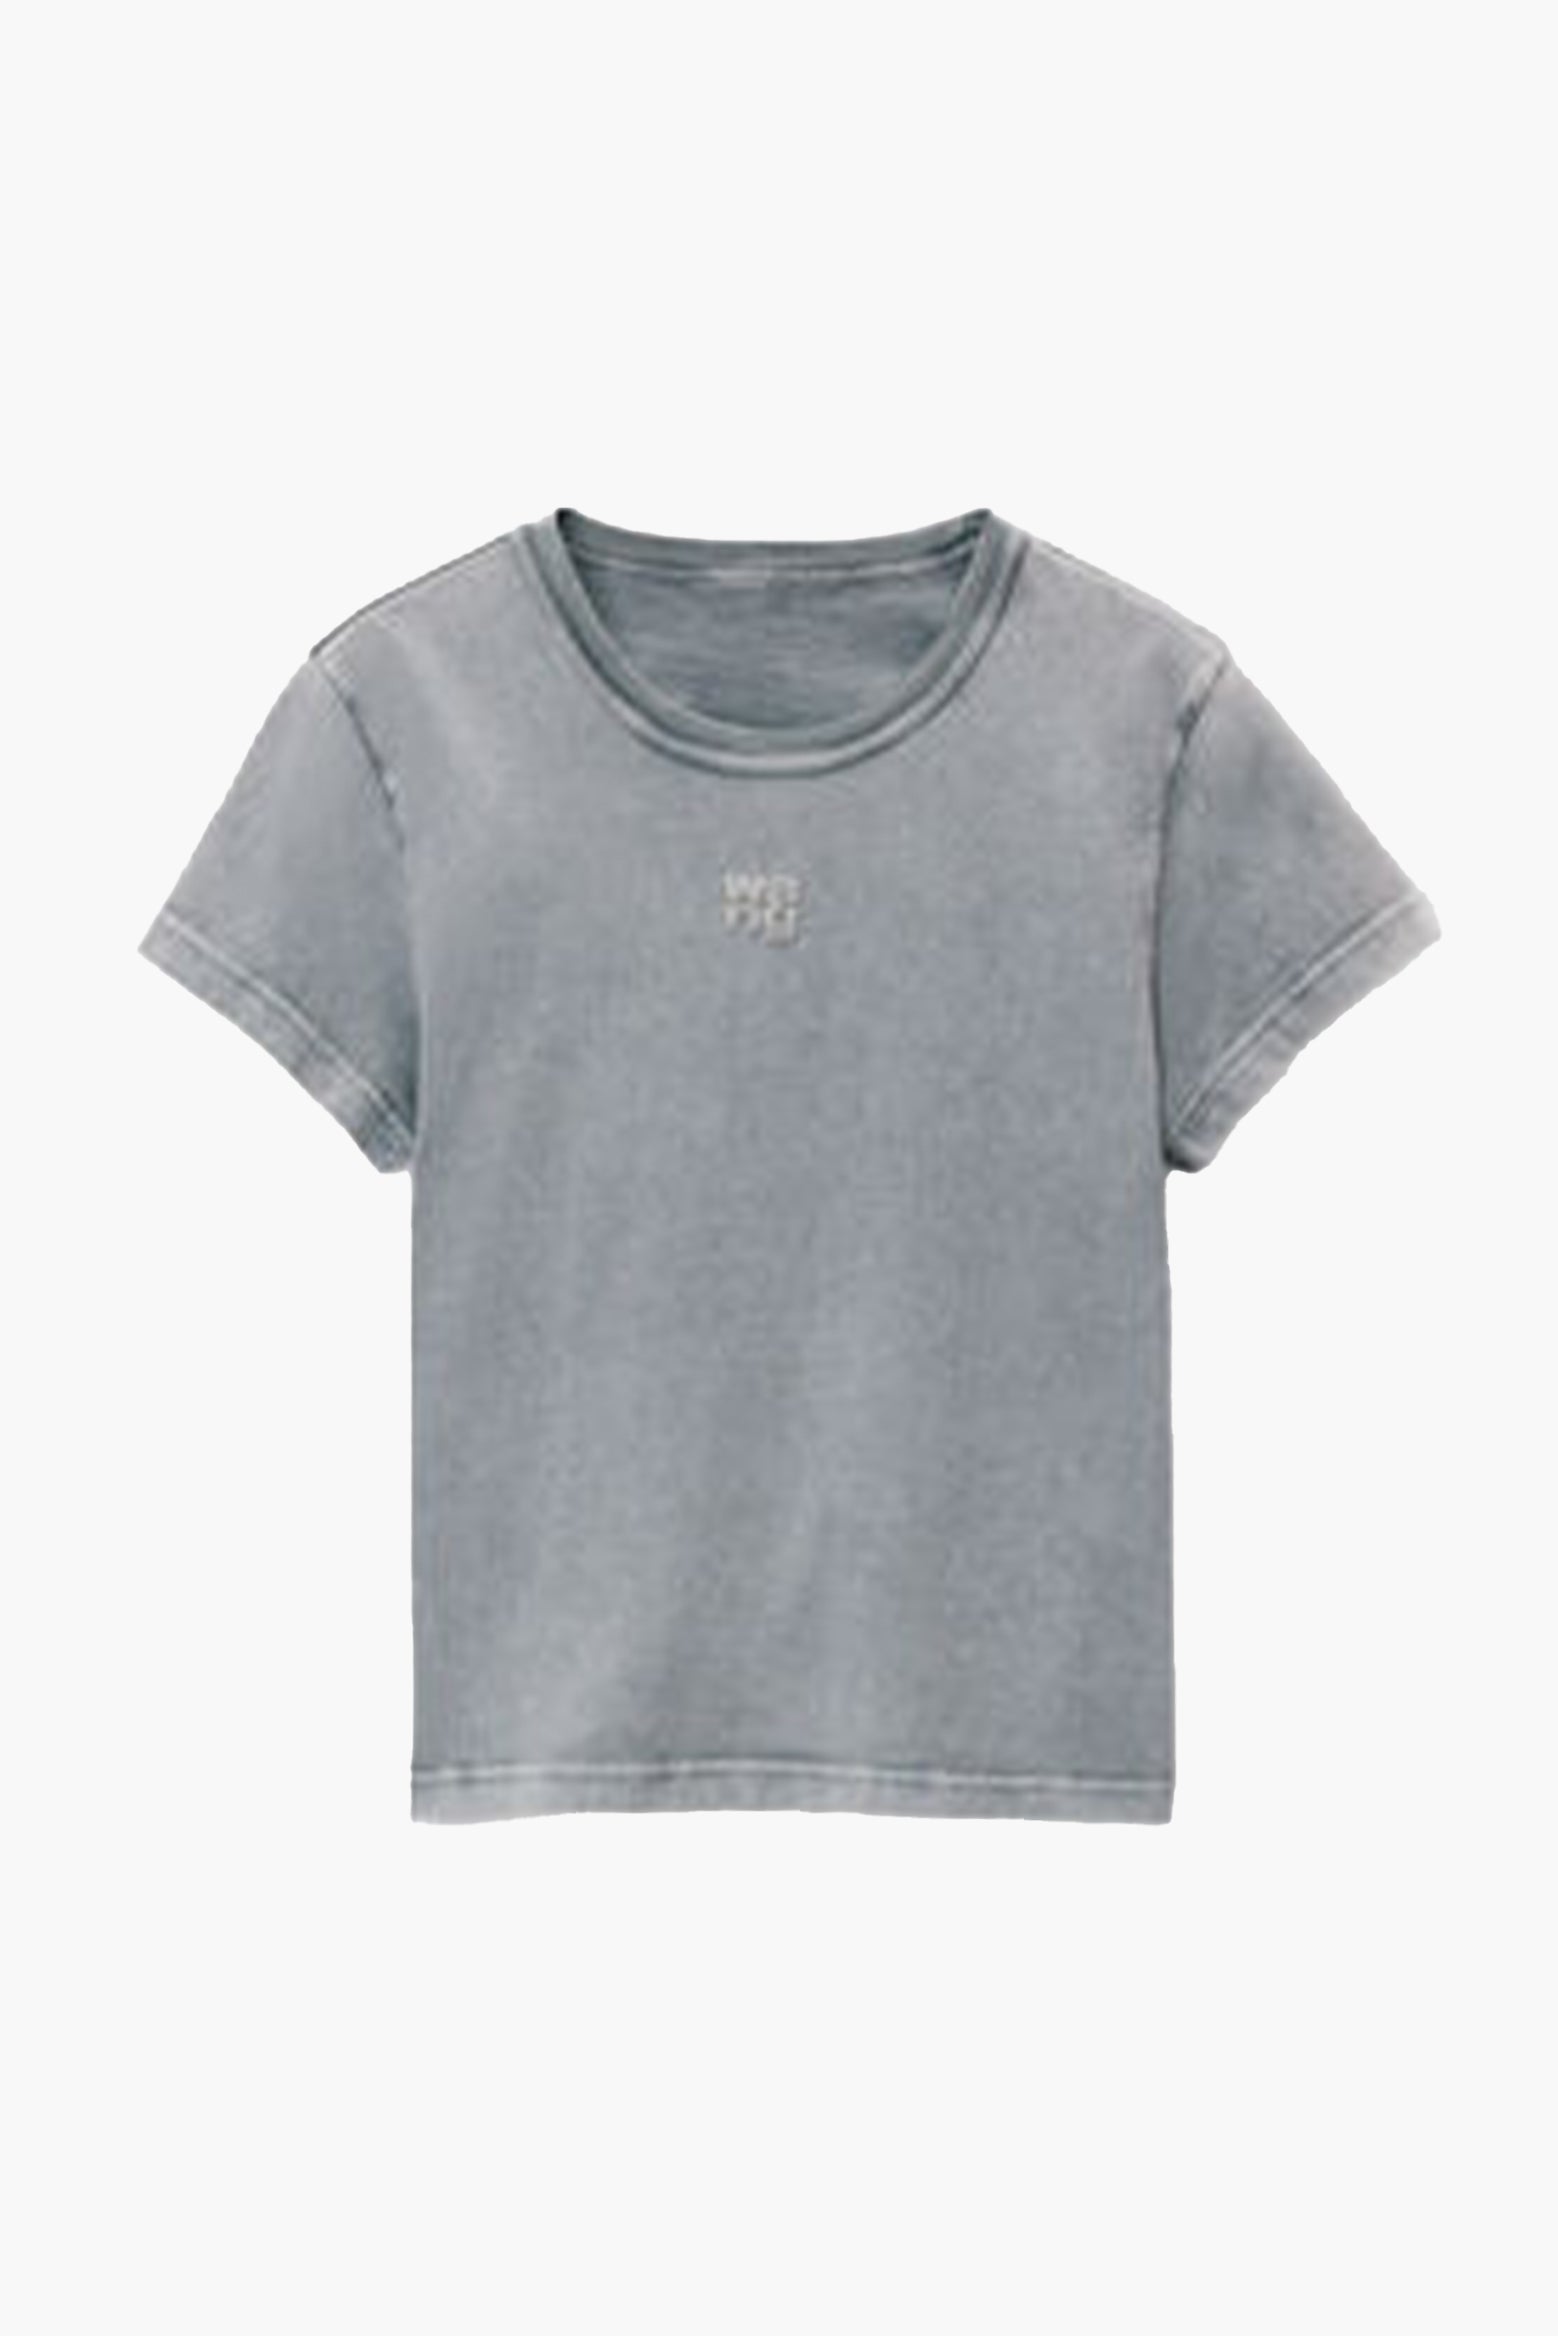 The Alexander Wang Essential Jersey Shrunk Tee with Puff Logo & Bound Neck in Acid Fog available at The New Trend. 